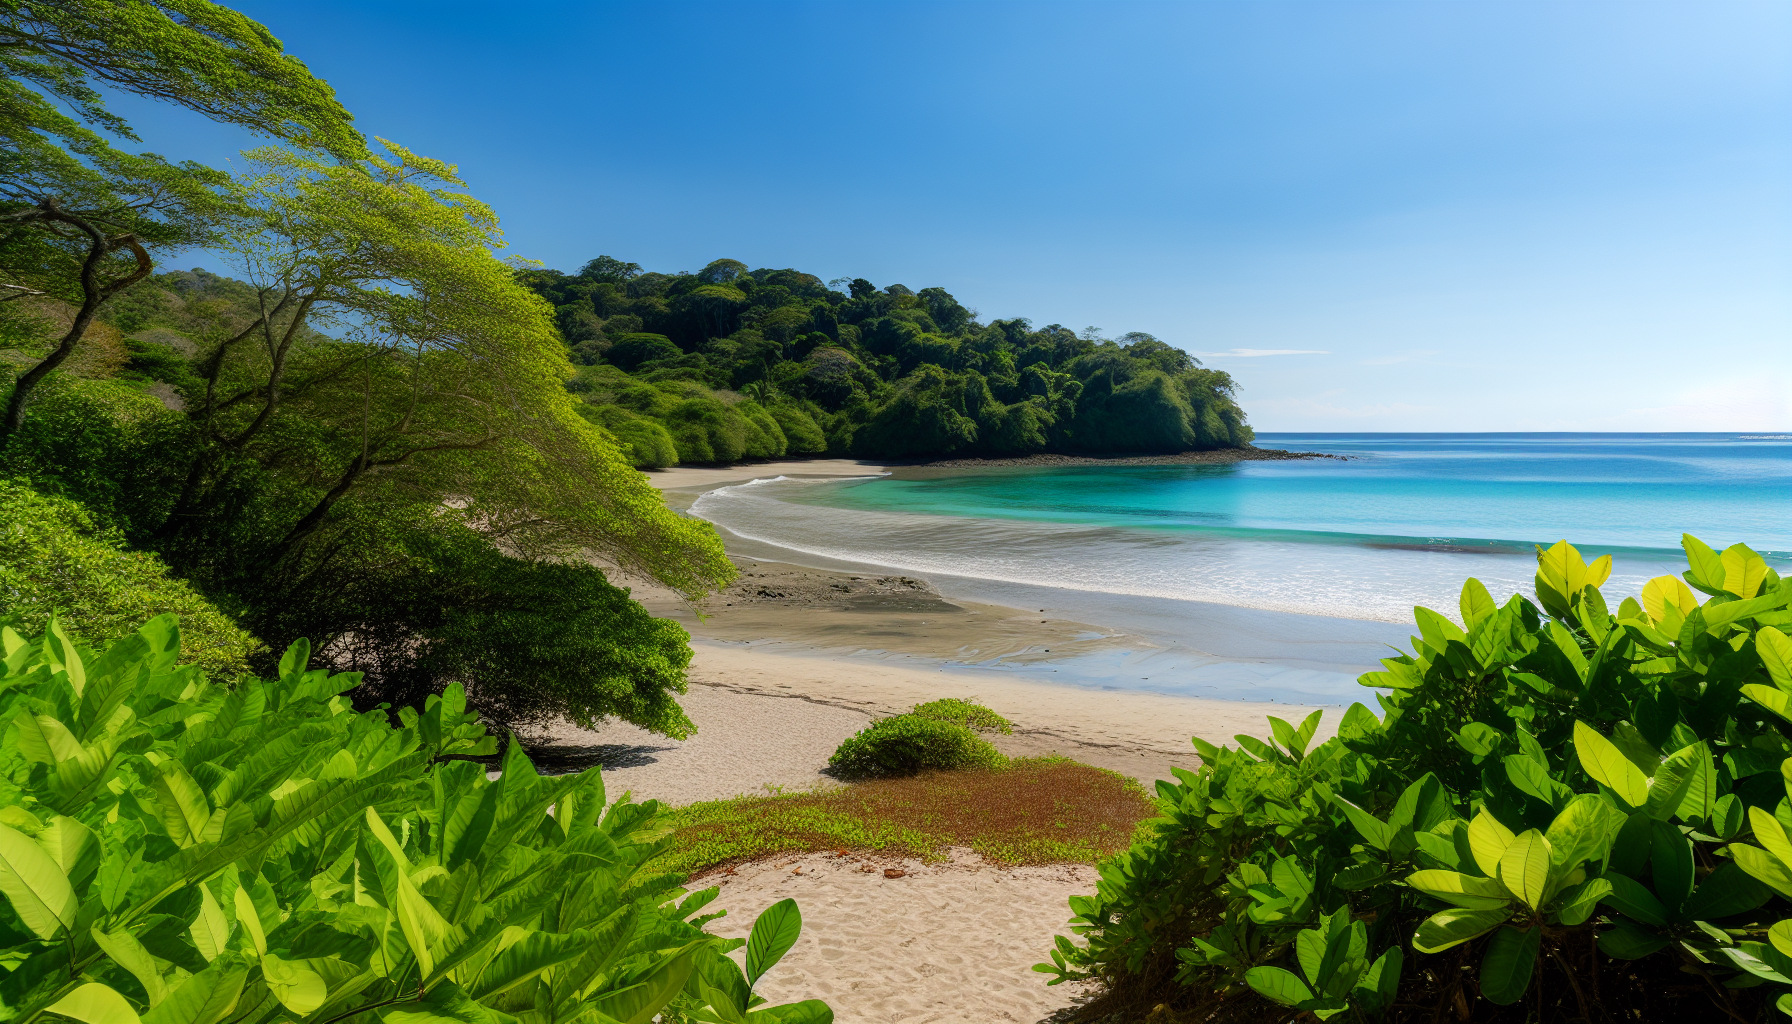 A serene beach with soft tan sand and clear water, Playa Minas offers a secluded atmosphere perfect for relaxation.